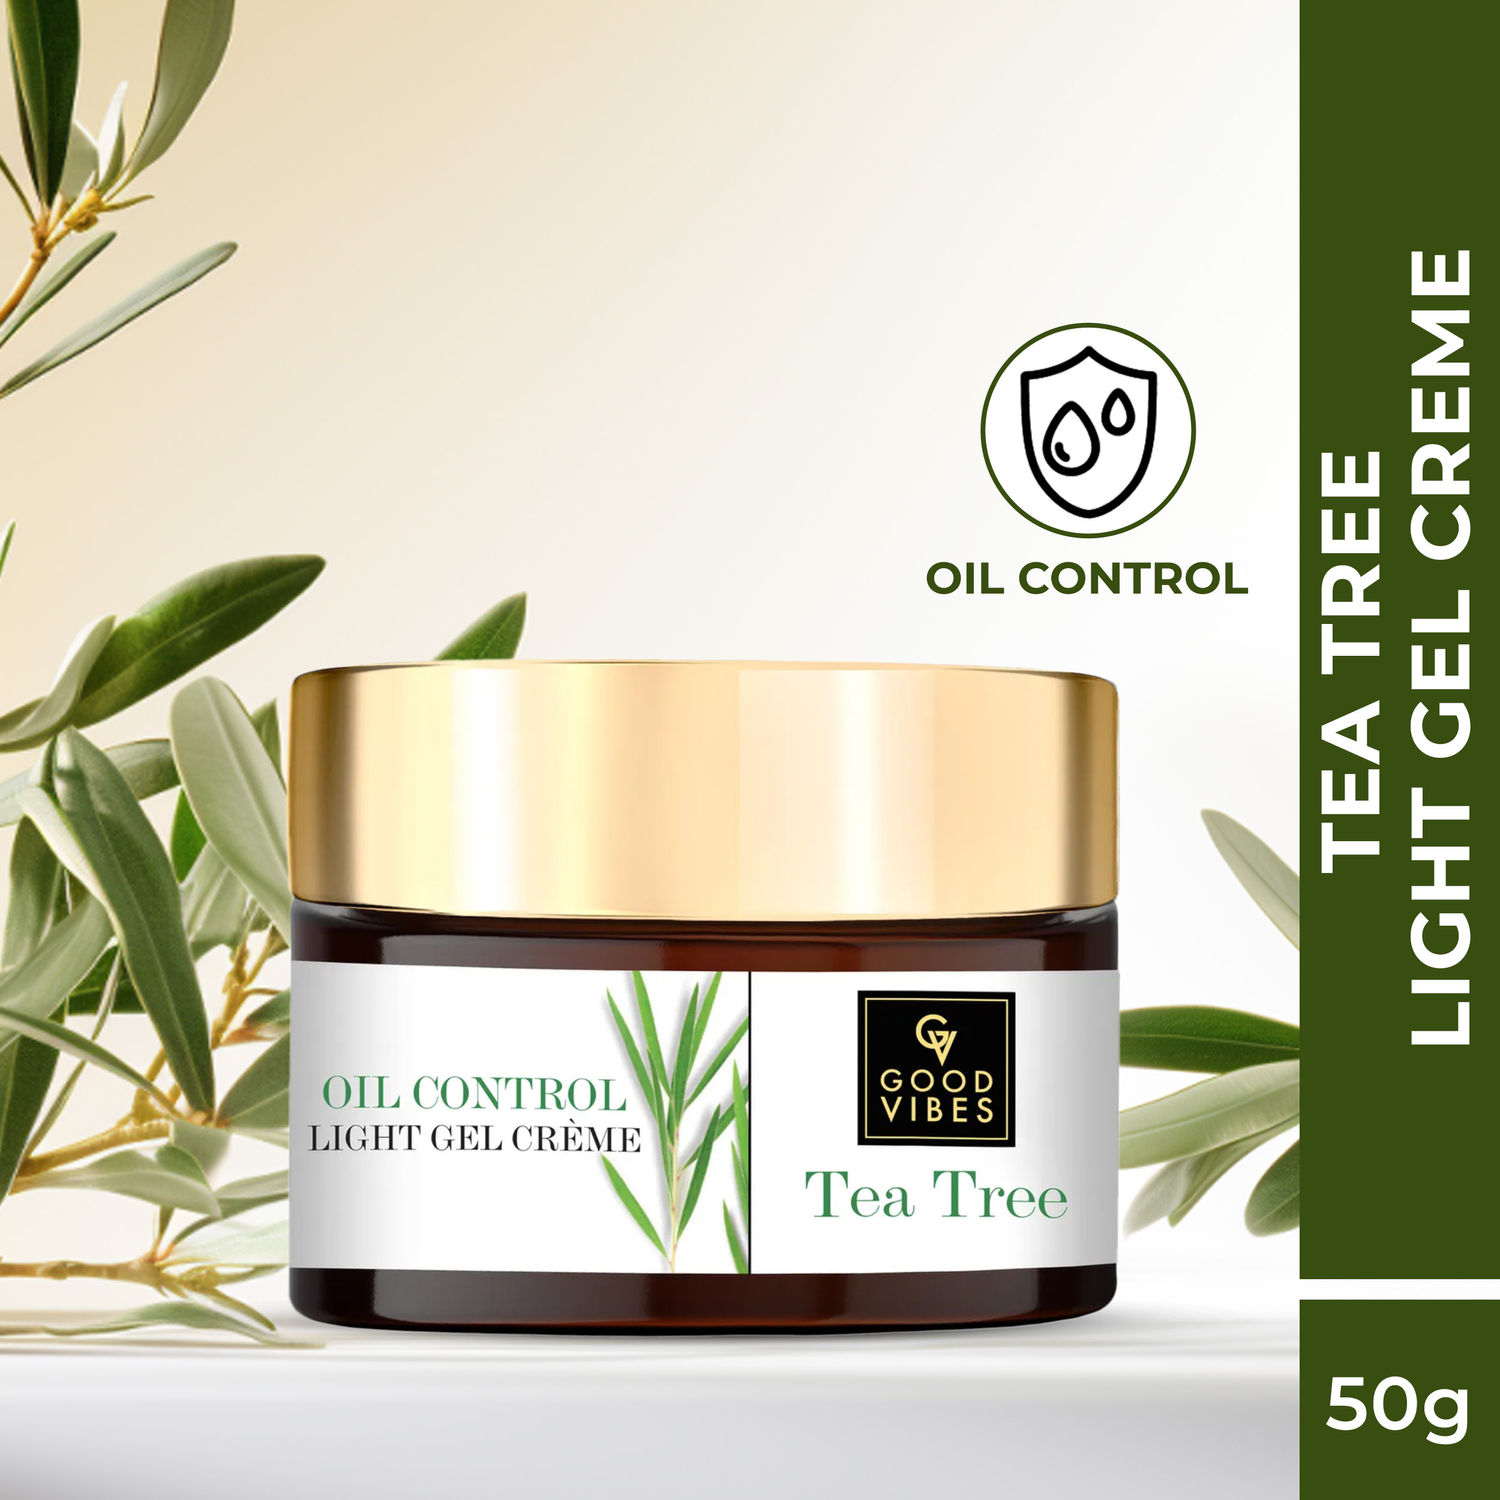 Buy Good Vibes Tea Tree Oil Control Light Gel Creme | Anti-Acne, Hydrating, Moisturizing | No Parabens, No Sulphates, No Mineral Oil (50 g) - Purplle